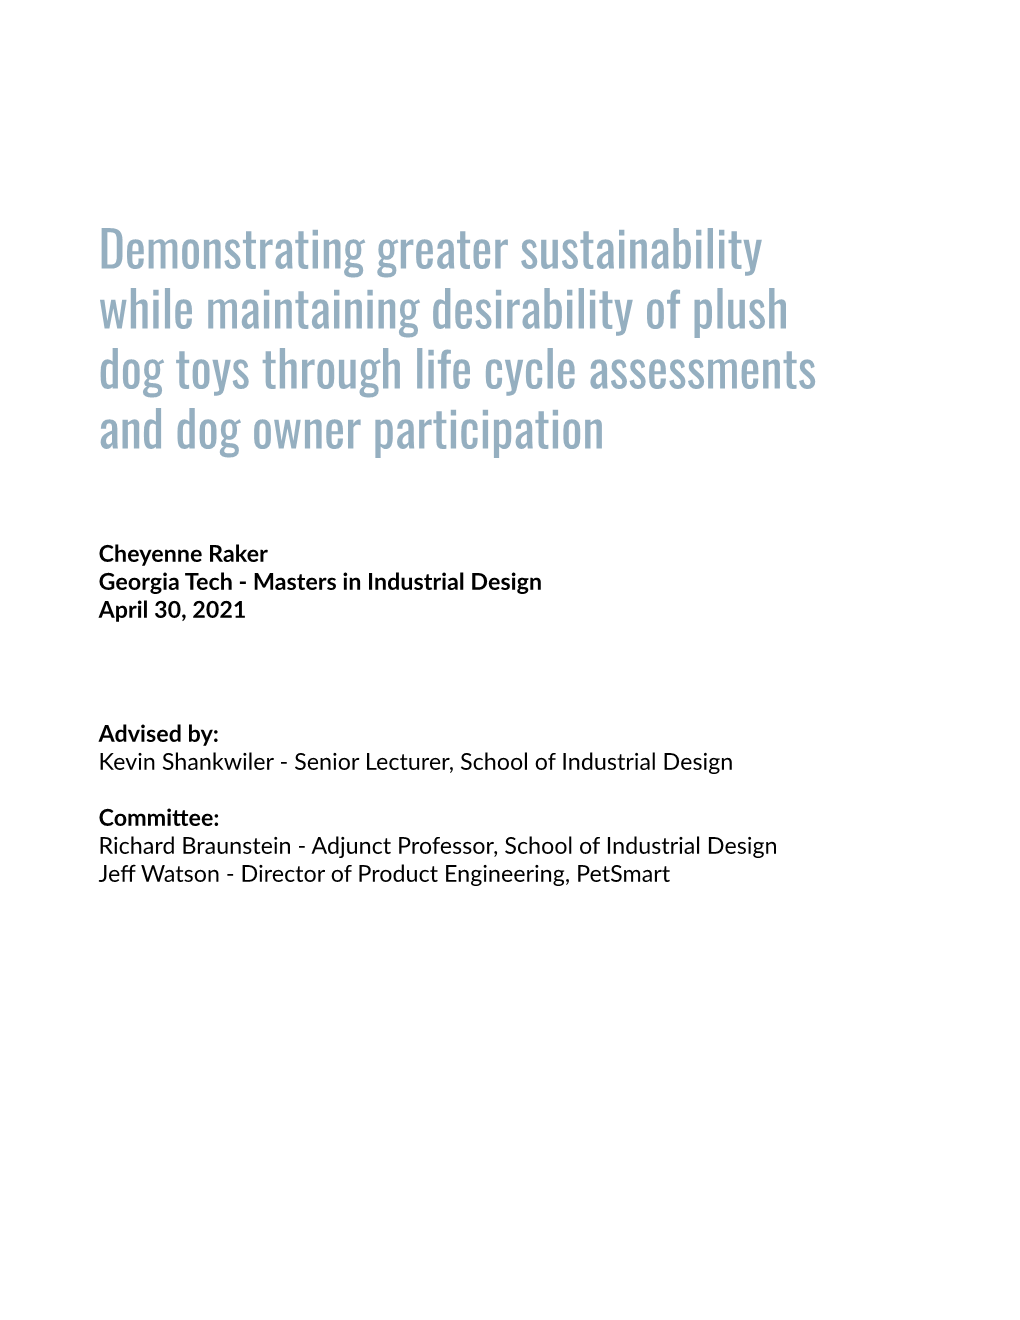 Demonstrating Greater Sustainability While Maintaining Desirability of Plush Dog Toys Through Life Cycle Assessments and Dog Owner Participation